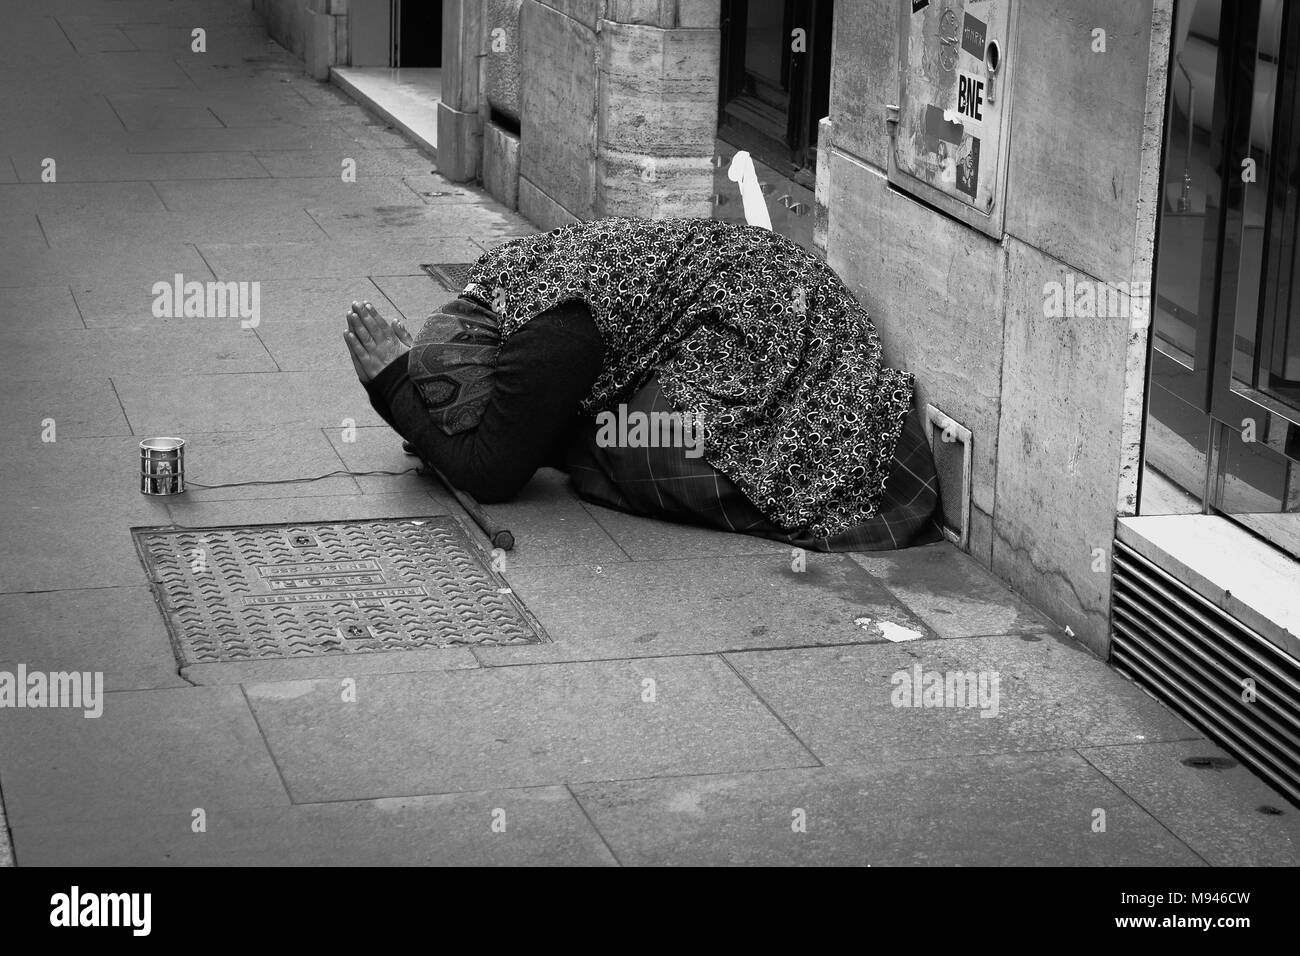 An old lady praying and begging for money on the street Stock Photo